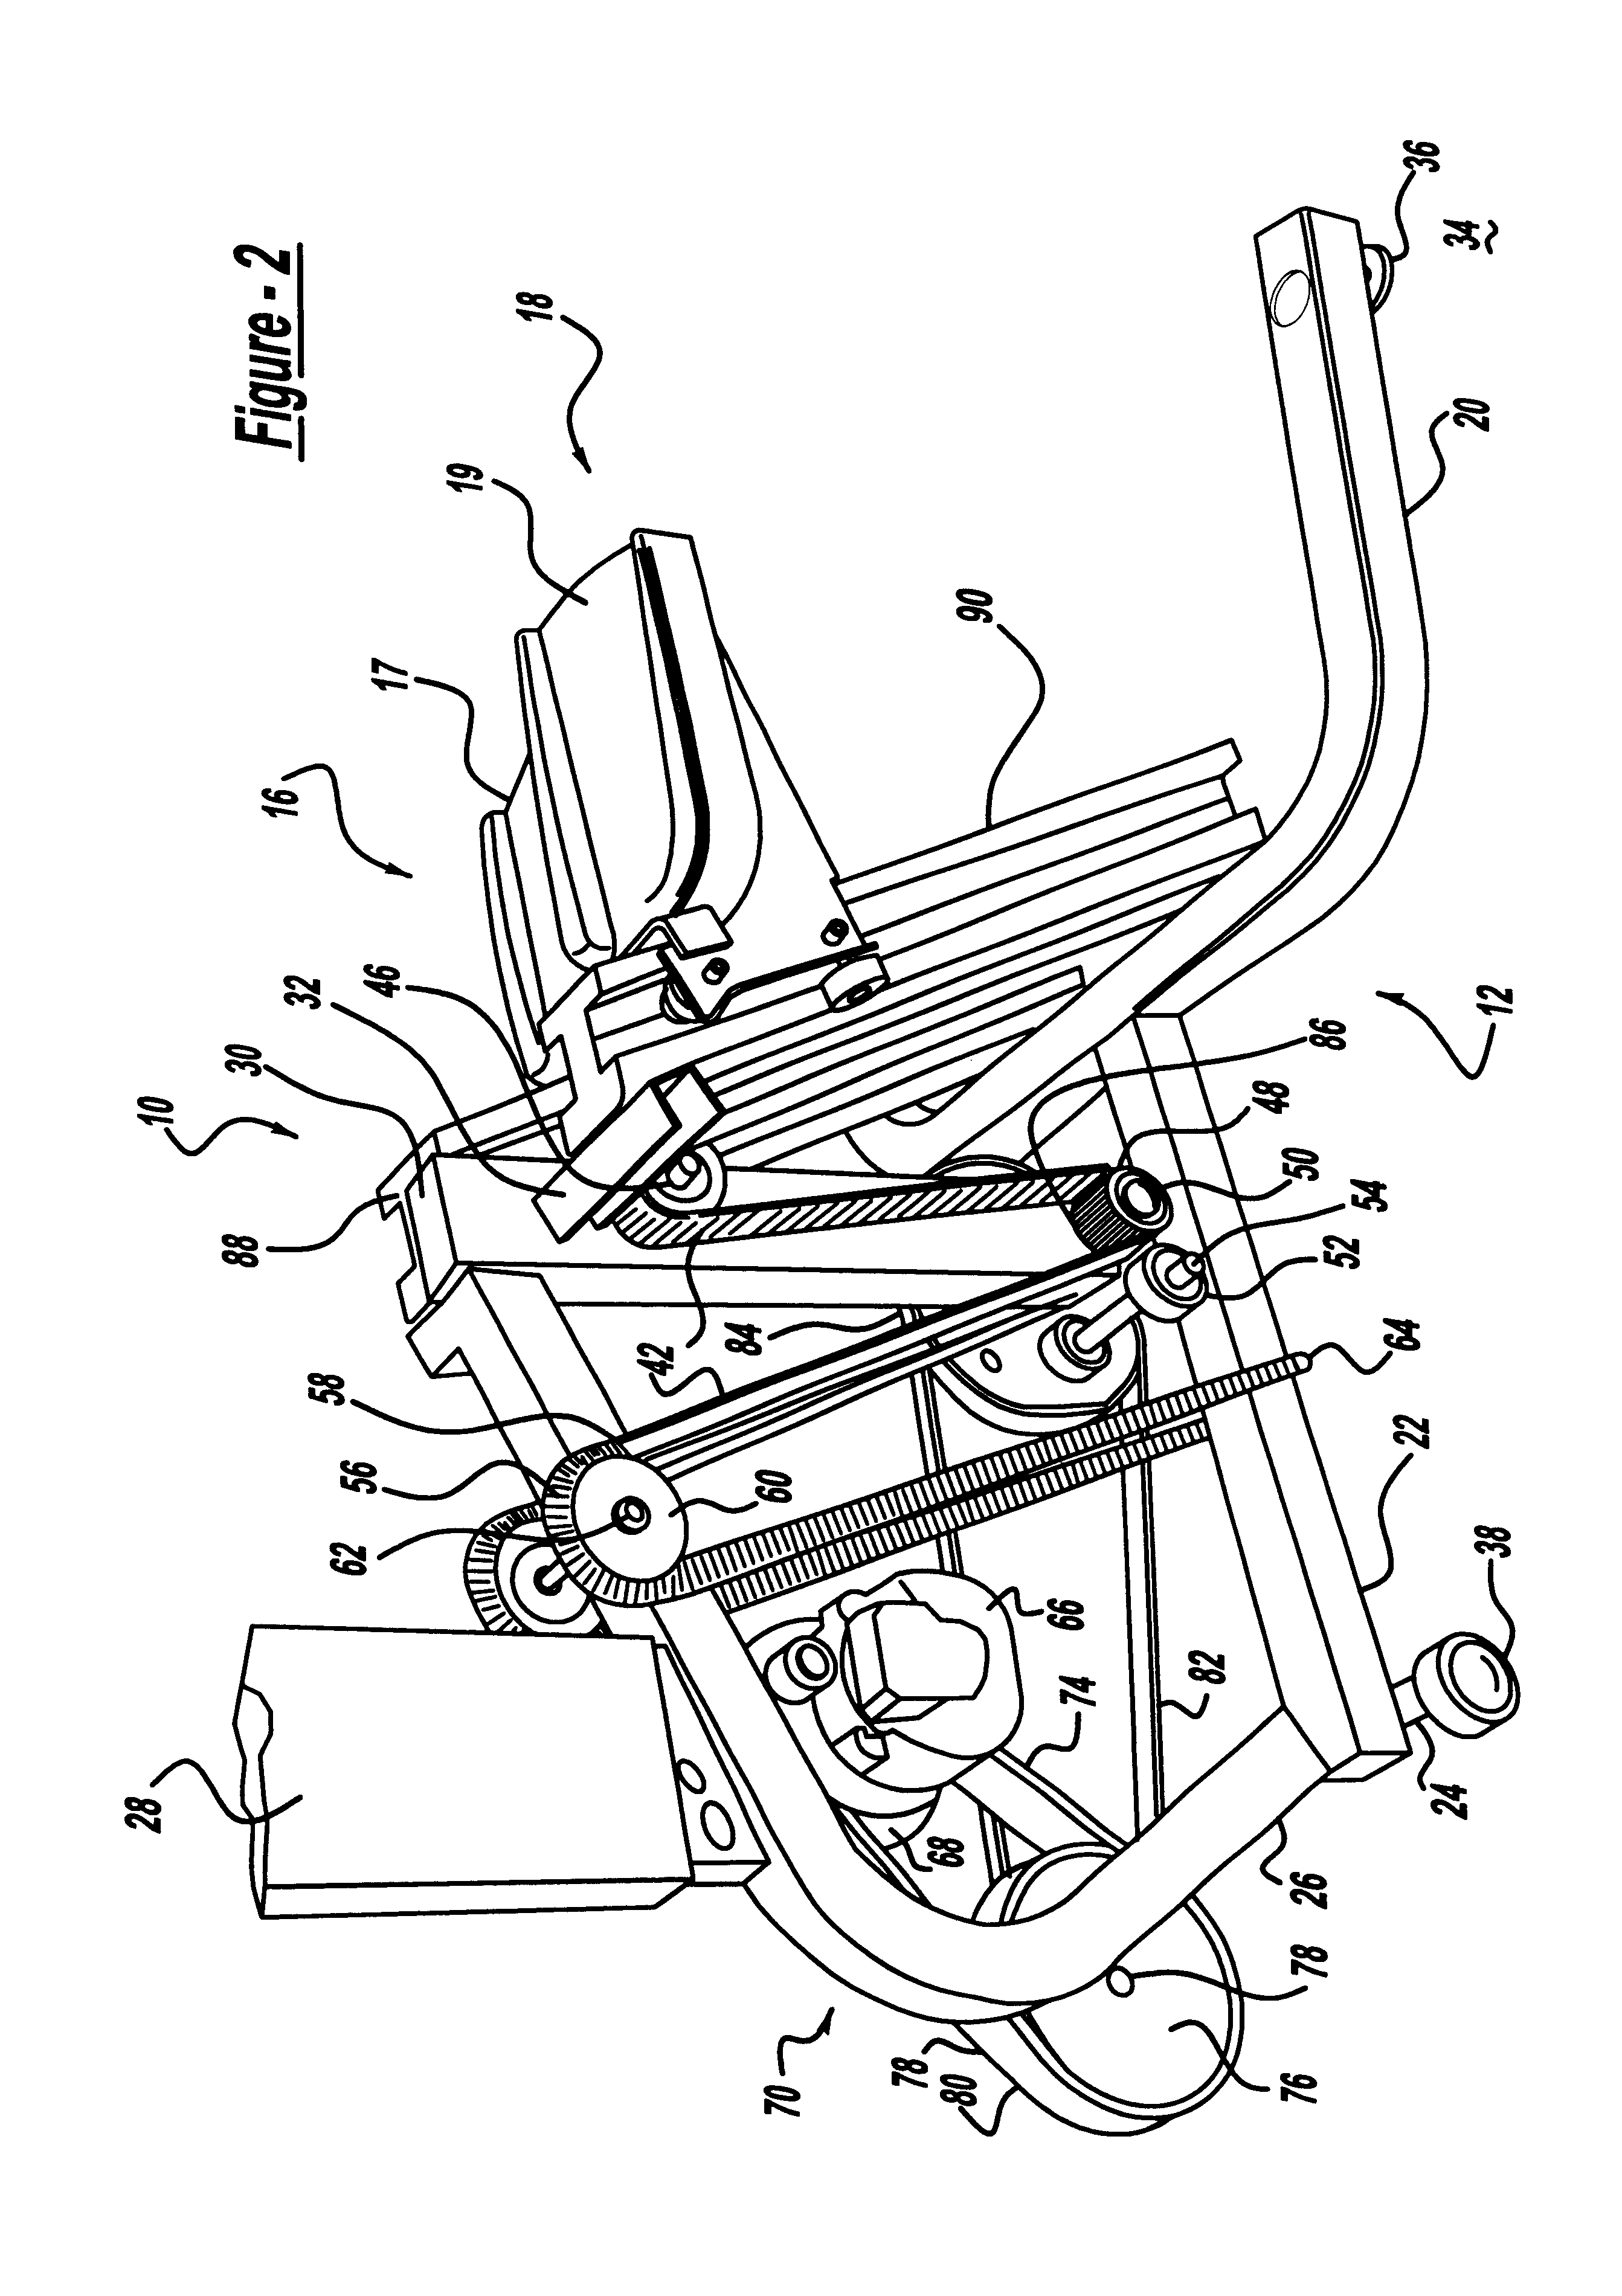 Stairclimber apparatus pedal mechanism